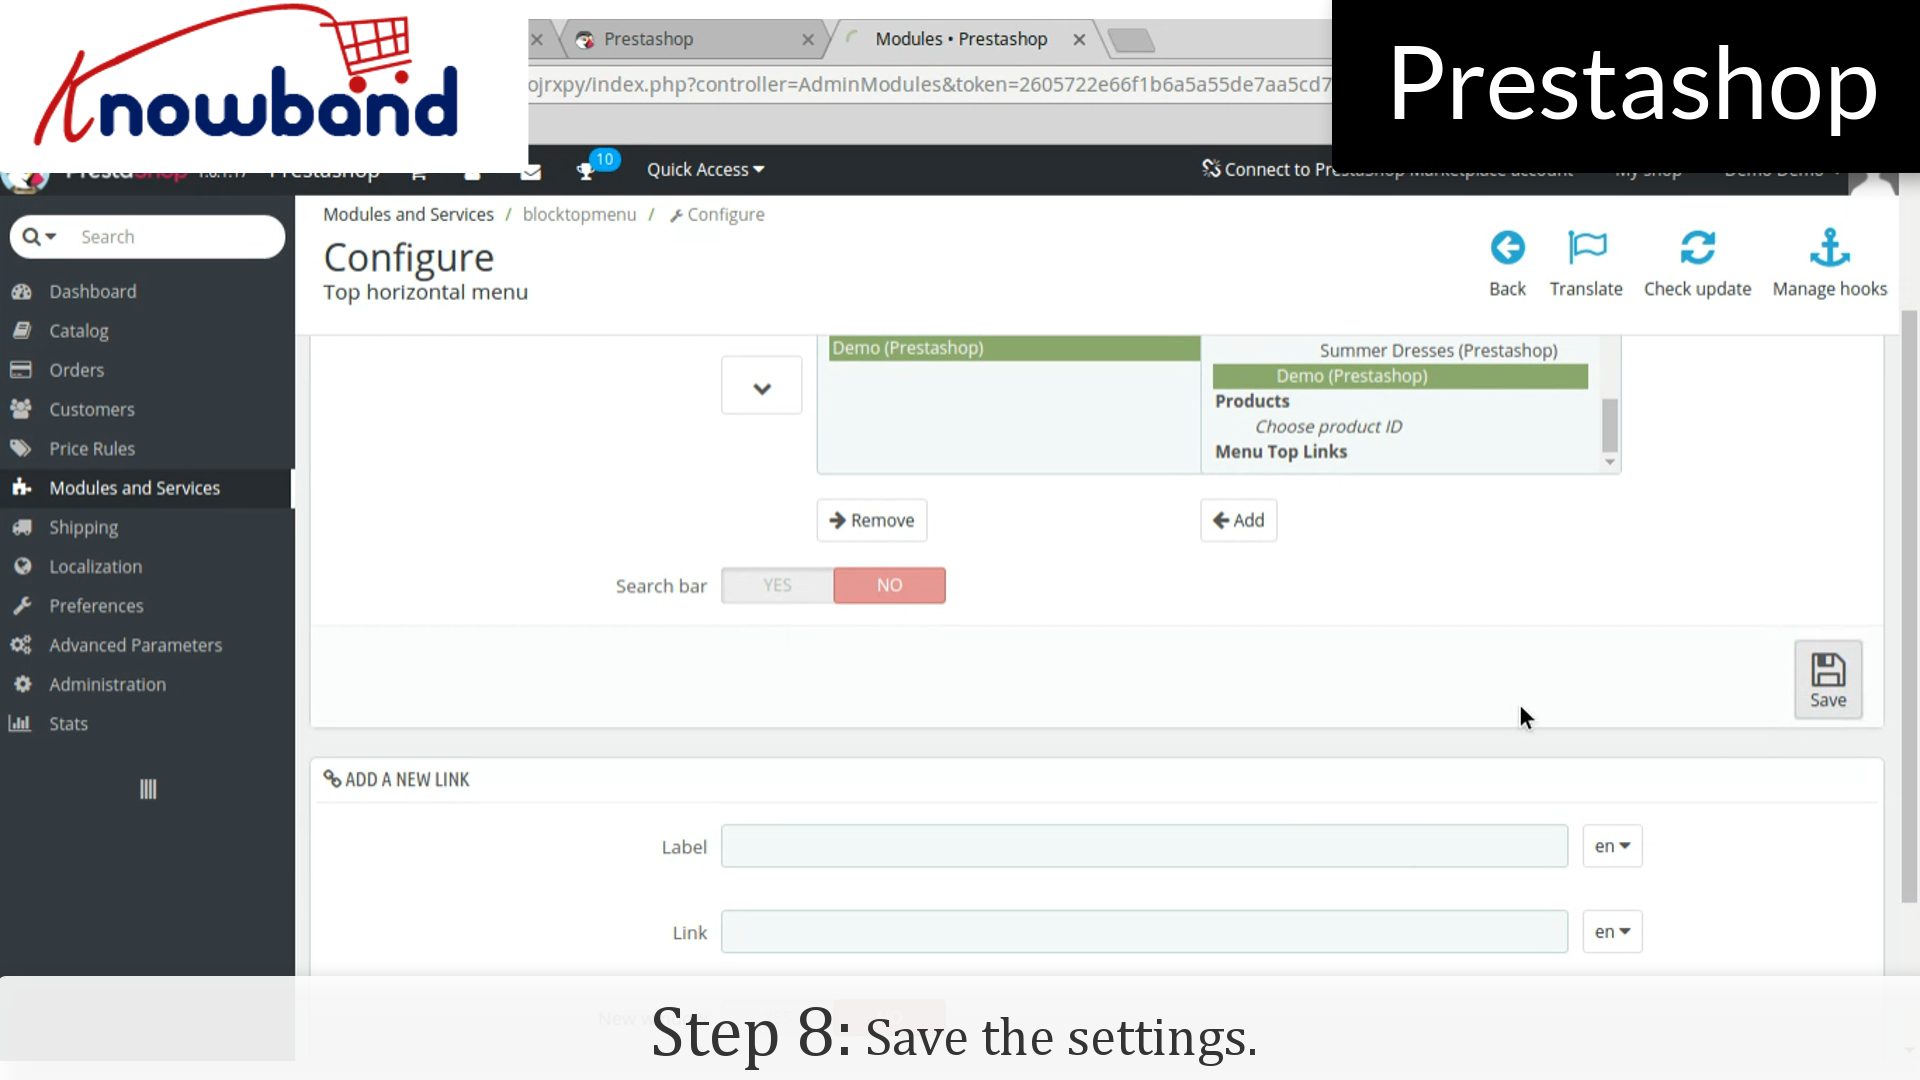 Save settings | Knowband Dashboard